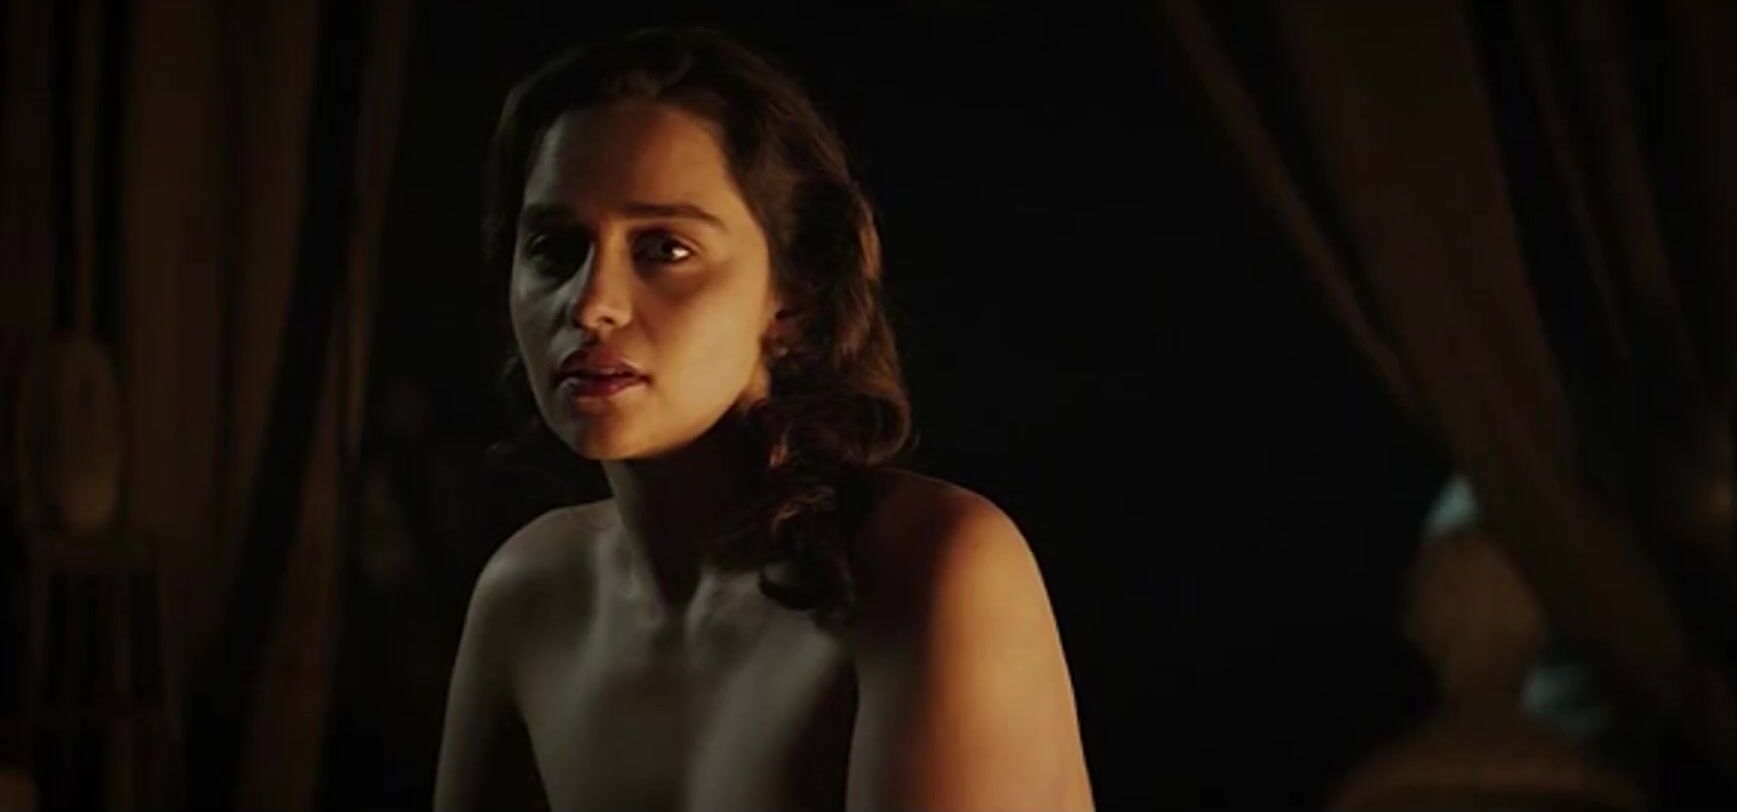 Dlouha Videa Sometimes Emilia Clarke can't resist booty call and allows co-star to fool around Vintage